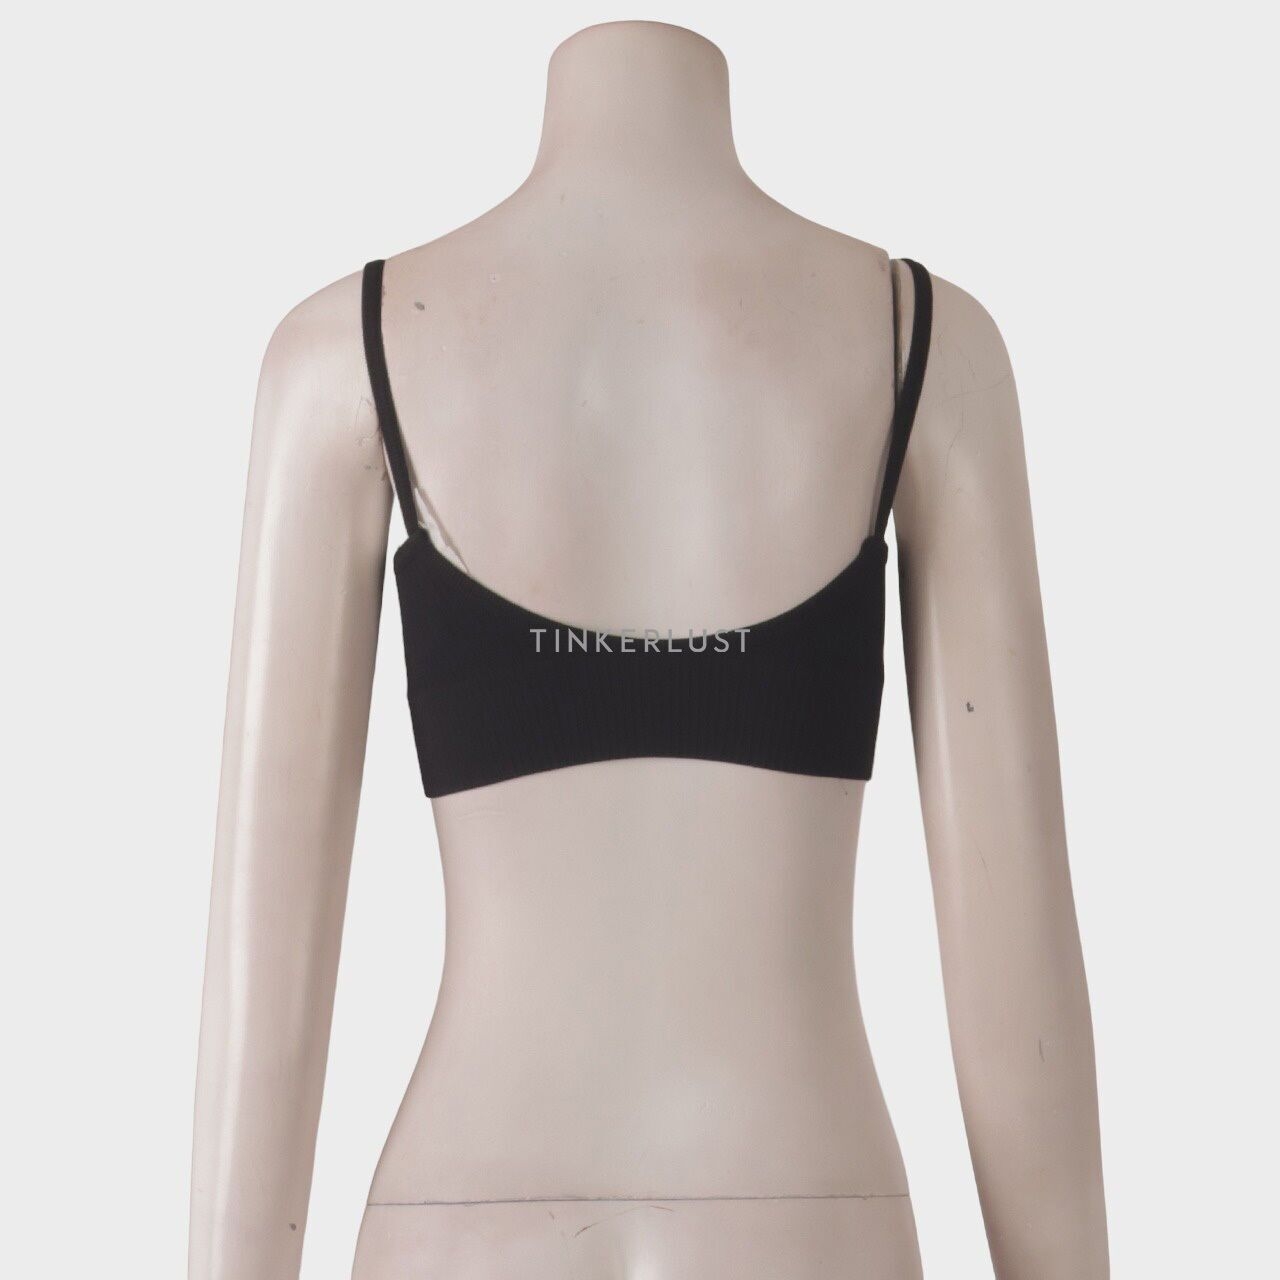 Private Collection Black Top